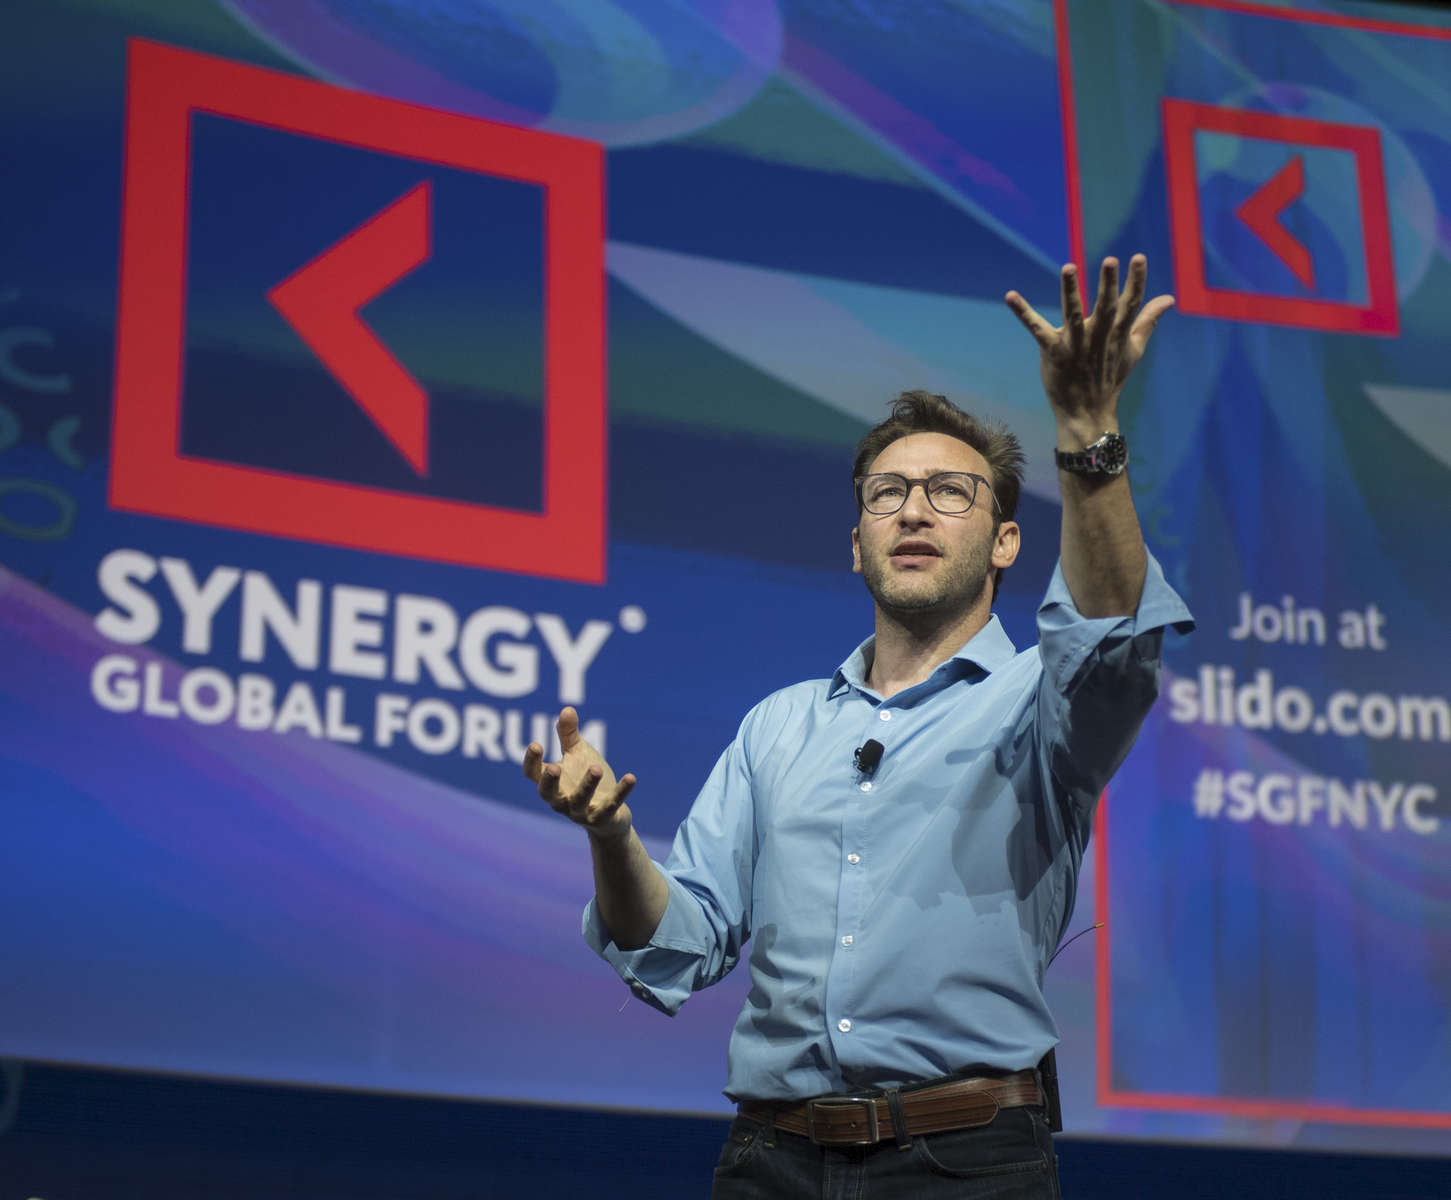 Simon Sinek is speaking at the Synergy Global Forum NY at The Theater at Madison Square Garden October 28, 2017. Photo by Ron Wyatt Photography